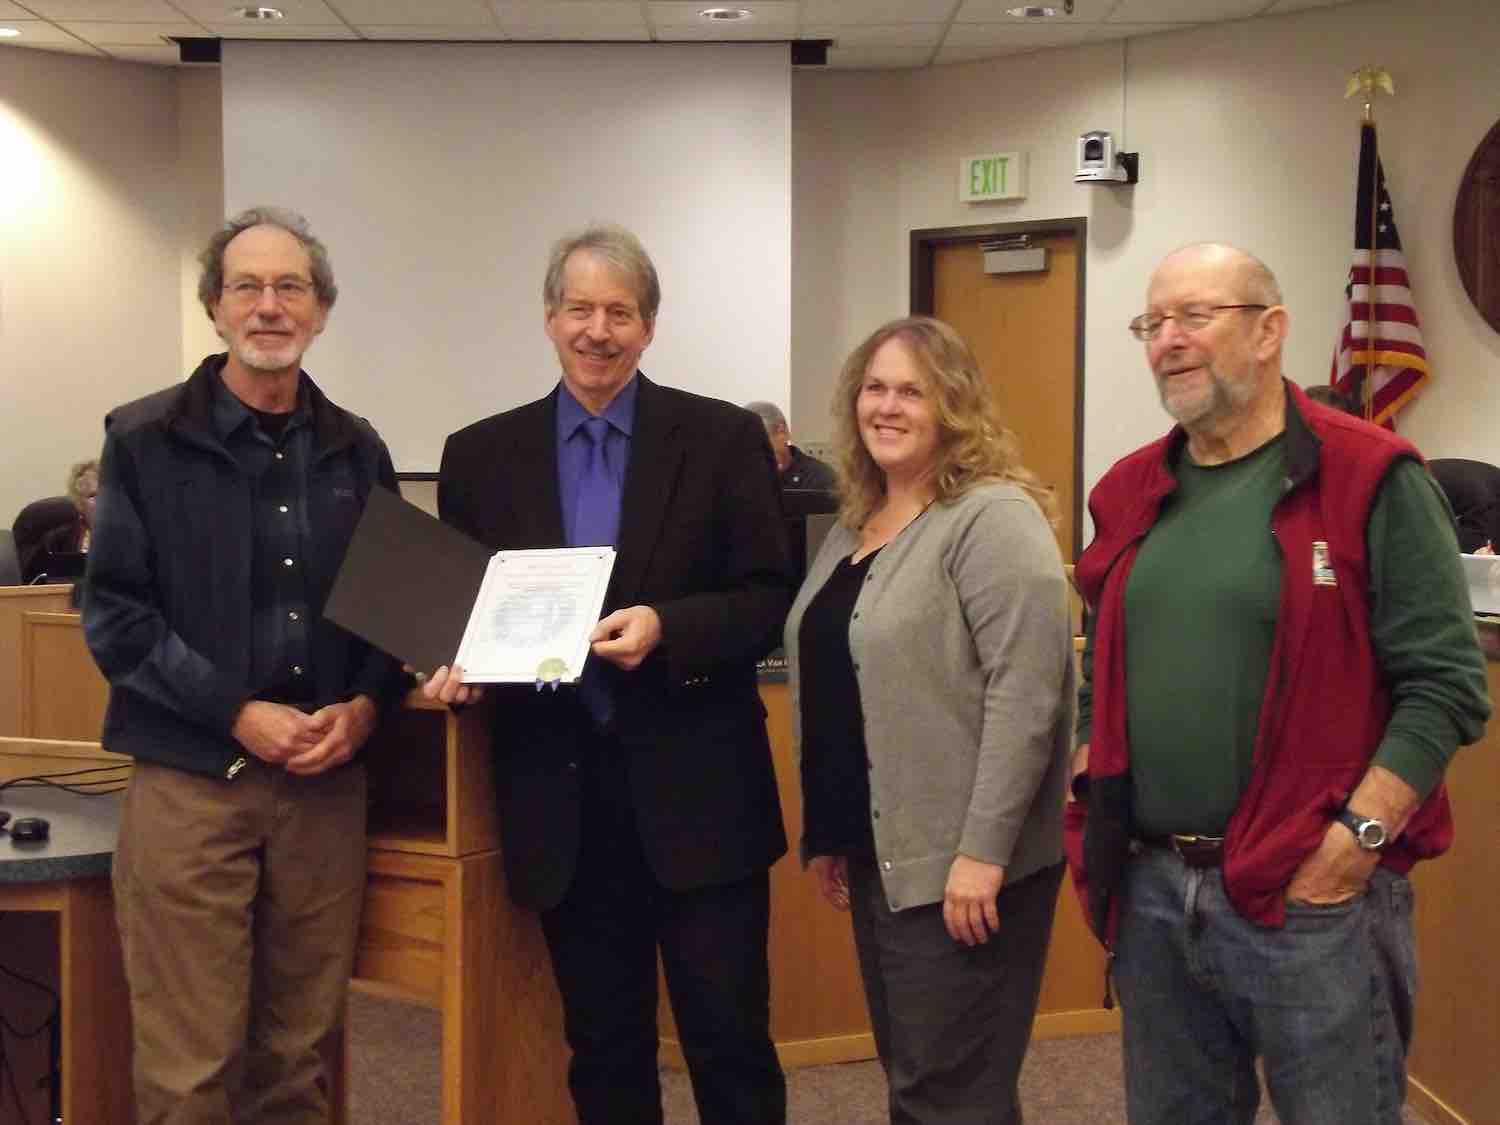 Library Advisory Board Chair Marc Komer, 2nd district Supervisor John McCowen, County Library Director Karen Horner, and LAB Vice Chair Benj Thomas receiving a proclamation celebrating 5 years of Measure A.